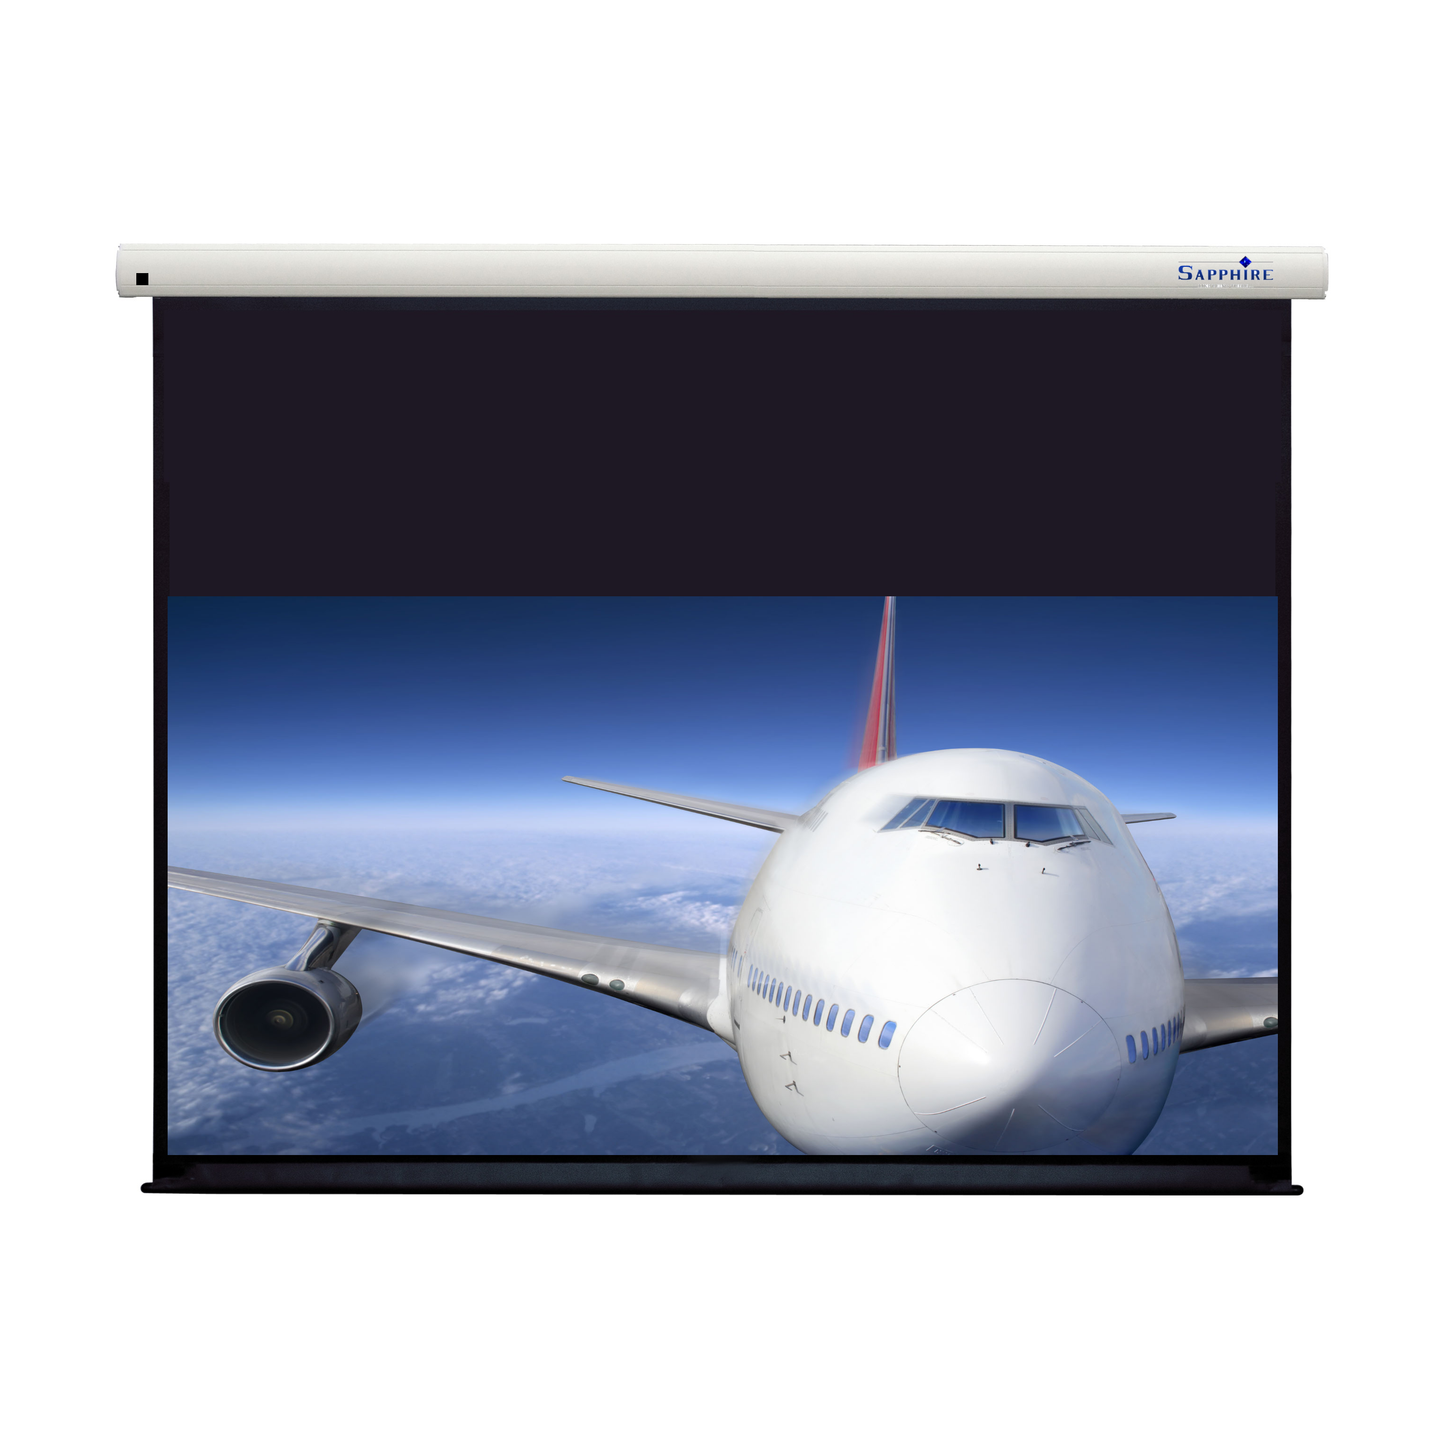 Sapphire Electric Screen with Trigger 16:9 Format Viewing Area 1704mm x 958mm Approx Case Dimensions L 1952mm x H 93mm x D 79mm